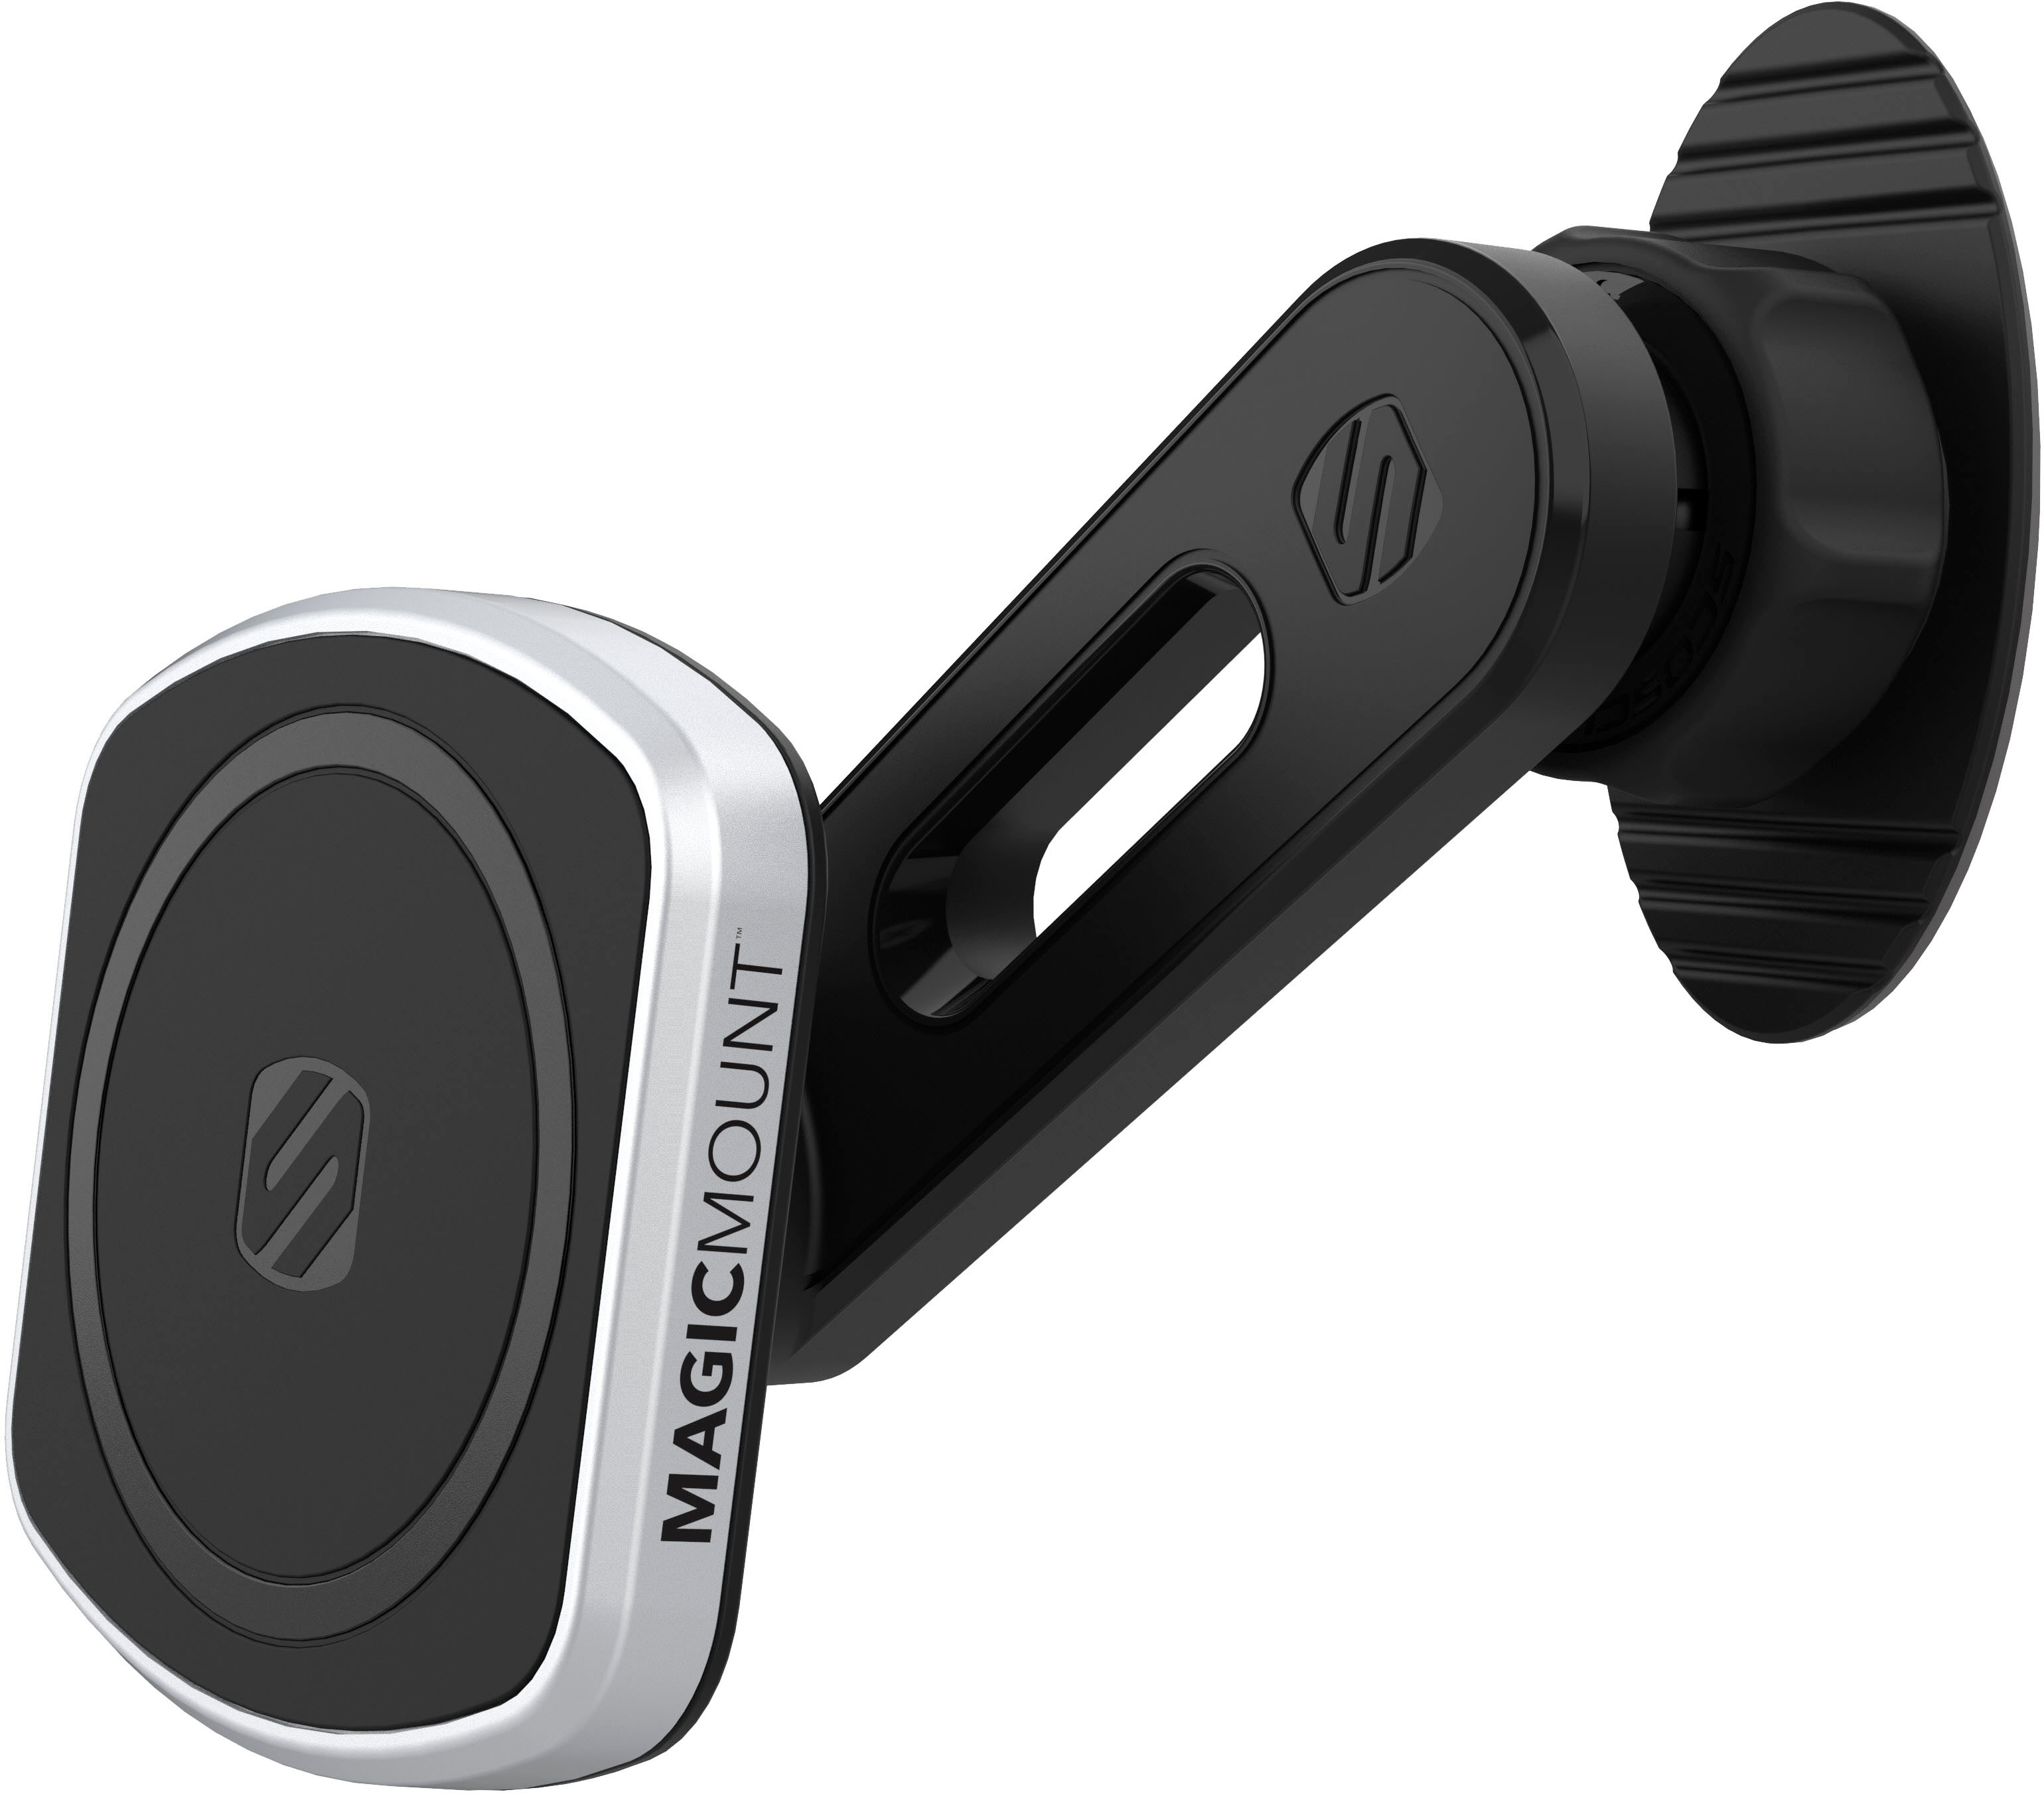 Angle View: Scosche - MagicMount Pro² Dash/Vent Mount for most Cell Phones - Black